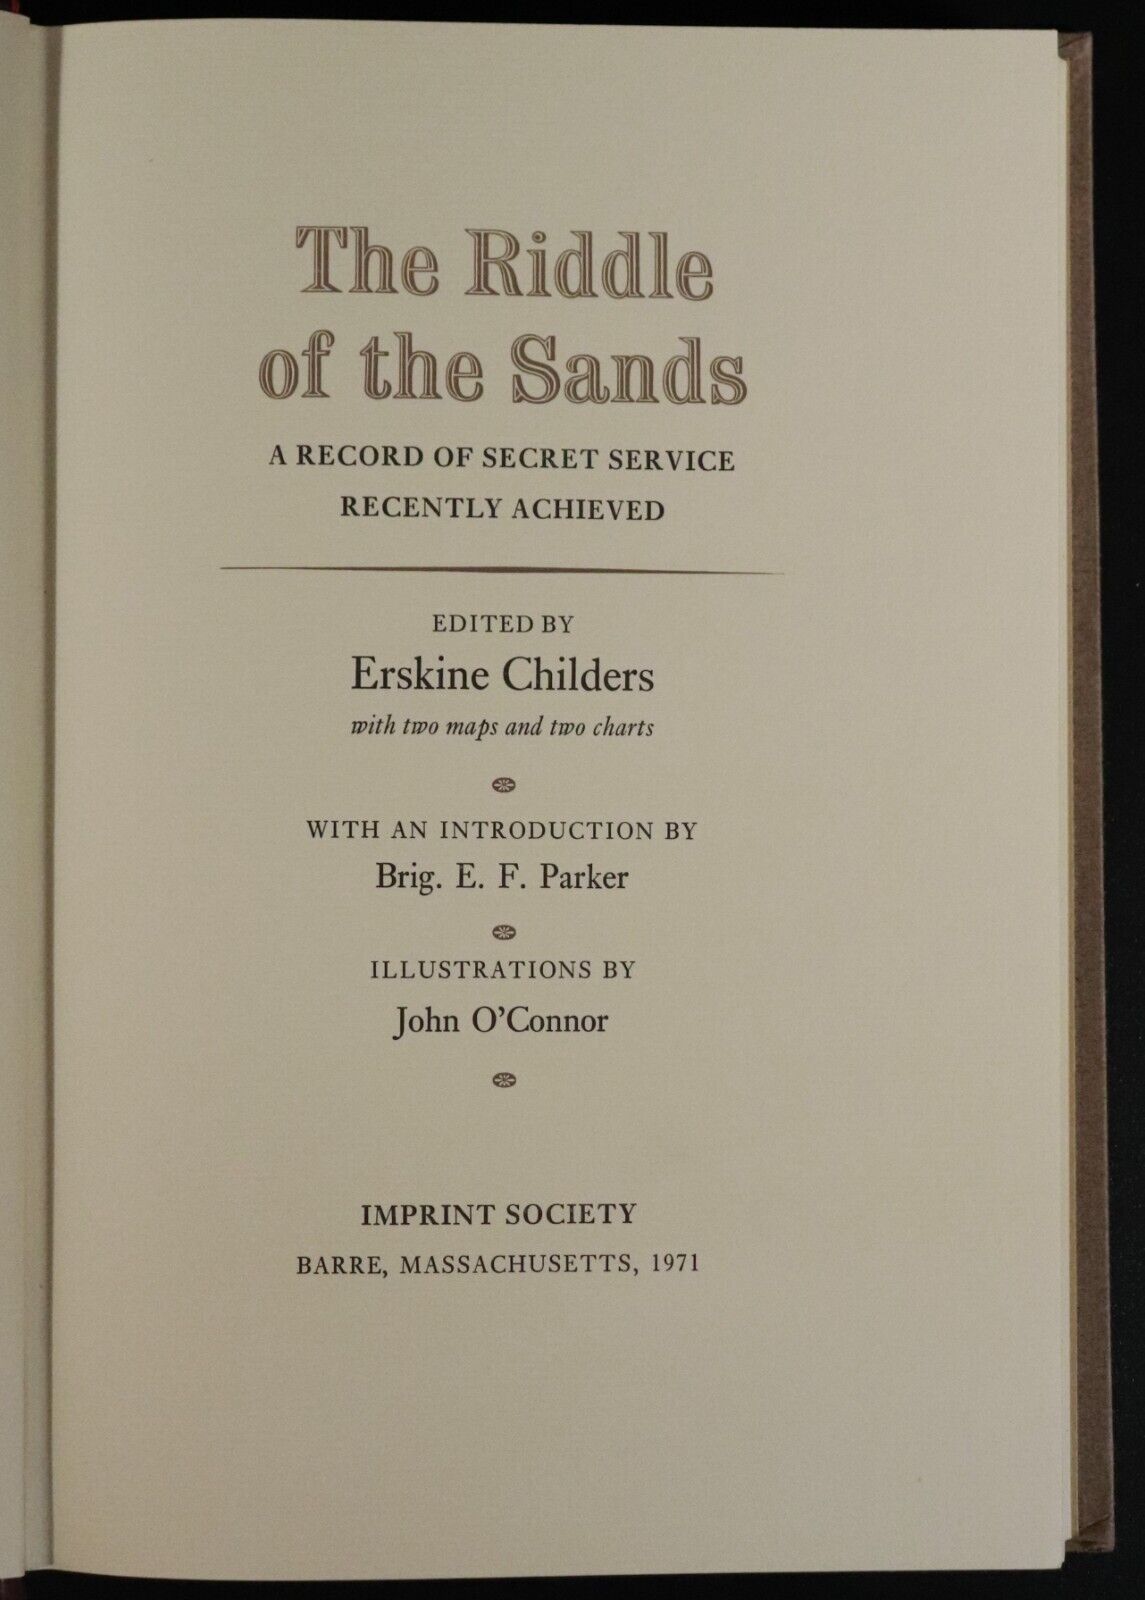 1971 The Riddle Of The Sands by Erskine Childers Imprint Society Book Military - 0